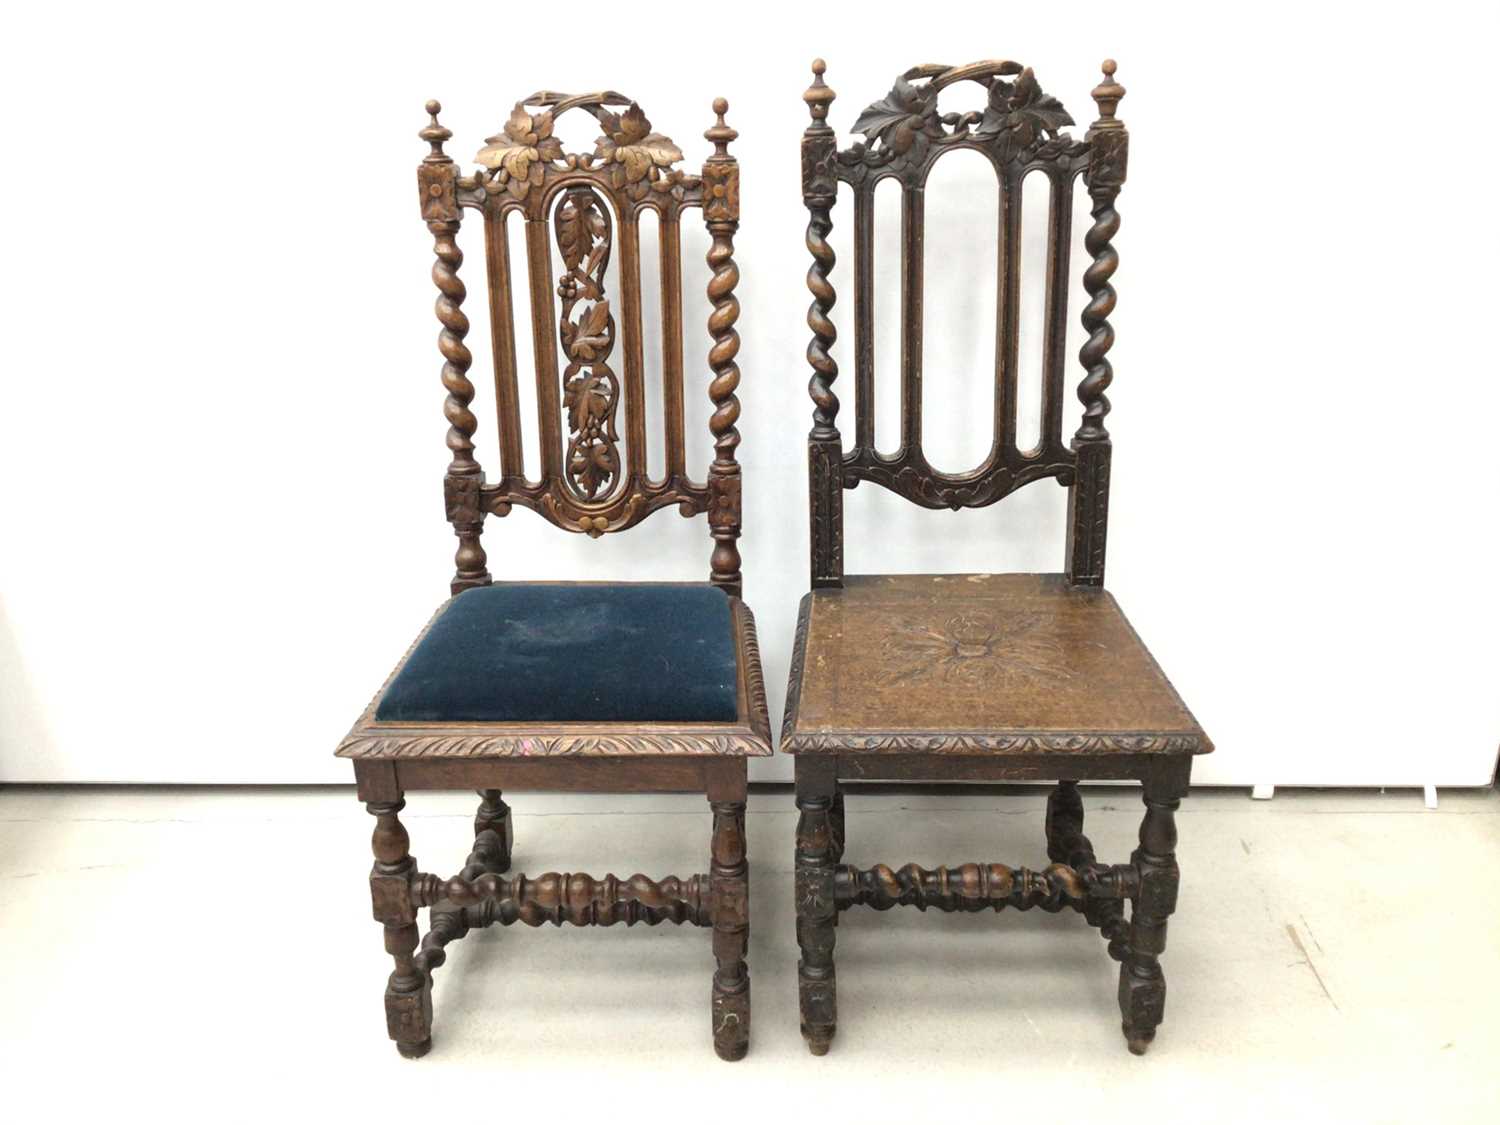 Two Victorian carved oak chairs with spiral twist supports